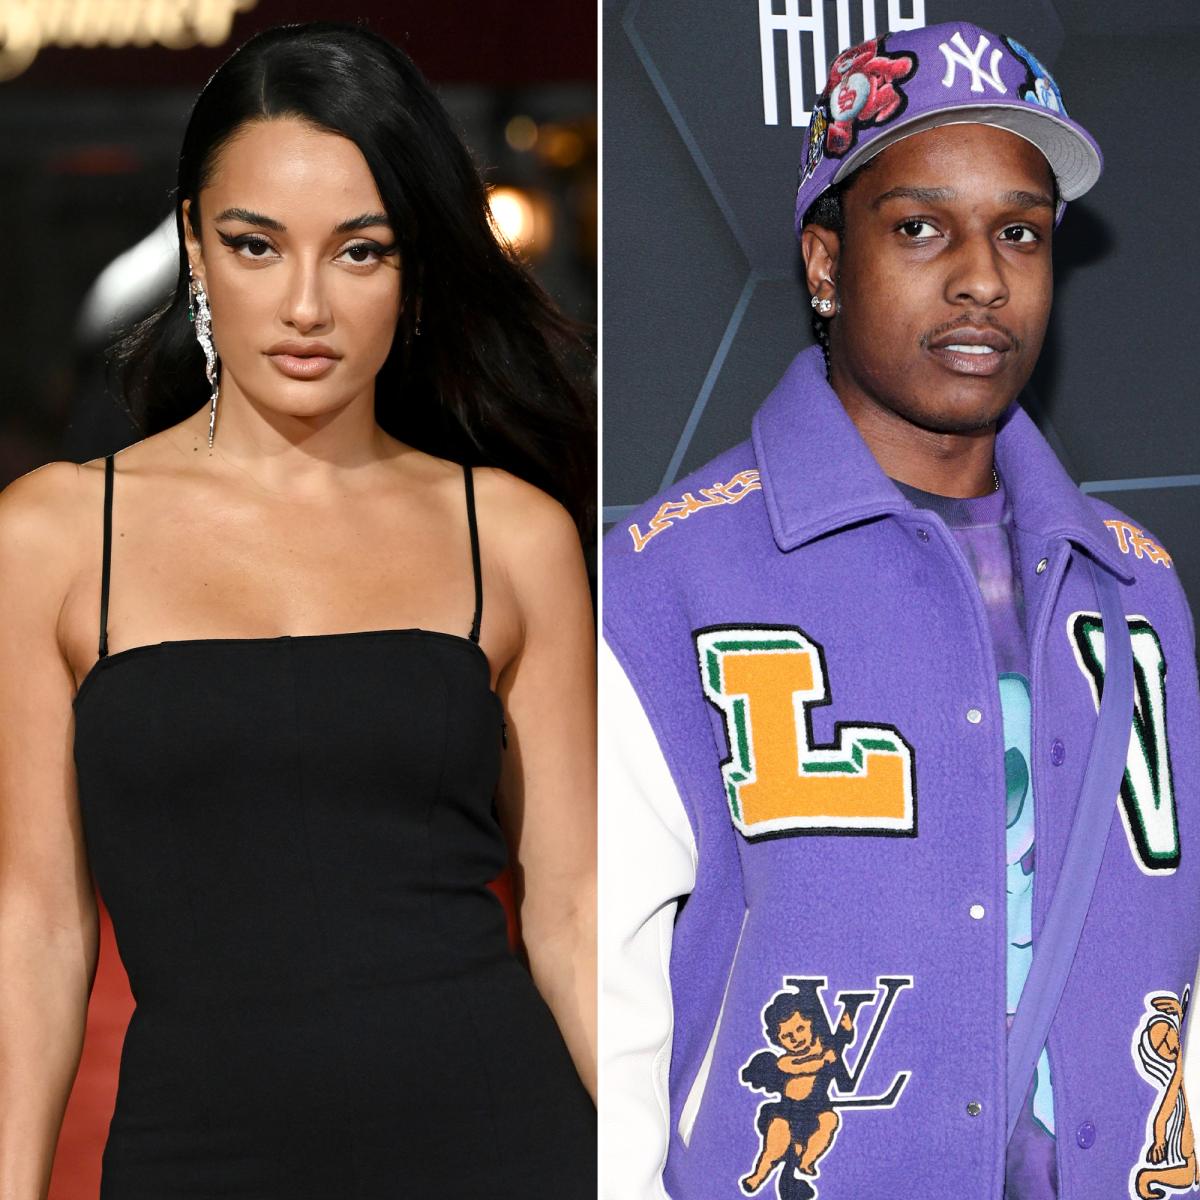 Pregnant Rihanna, ASAP Rocky Show PDA After Cheating Allegations